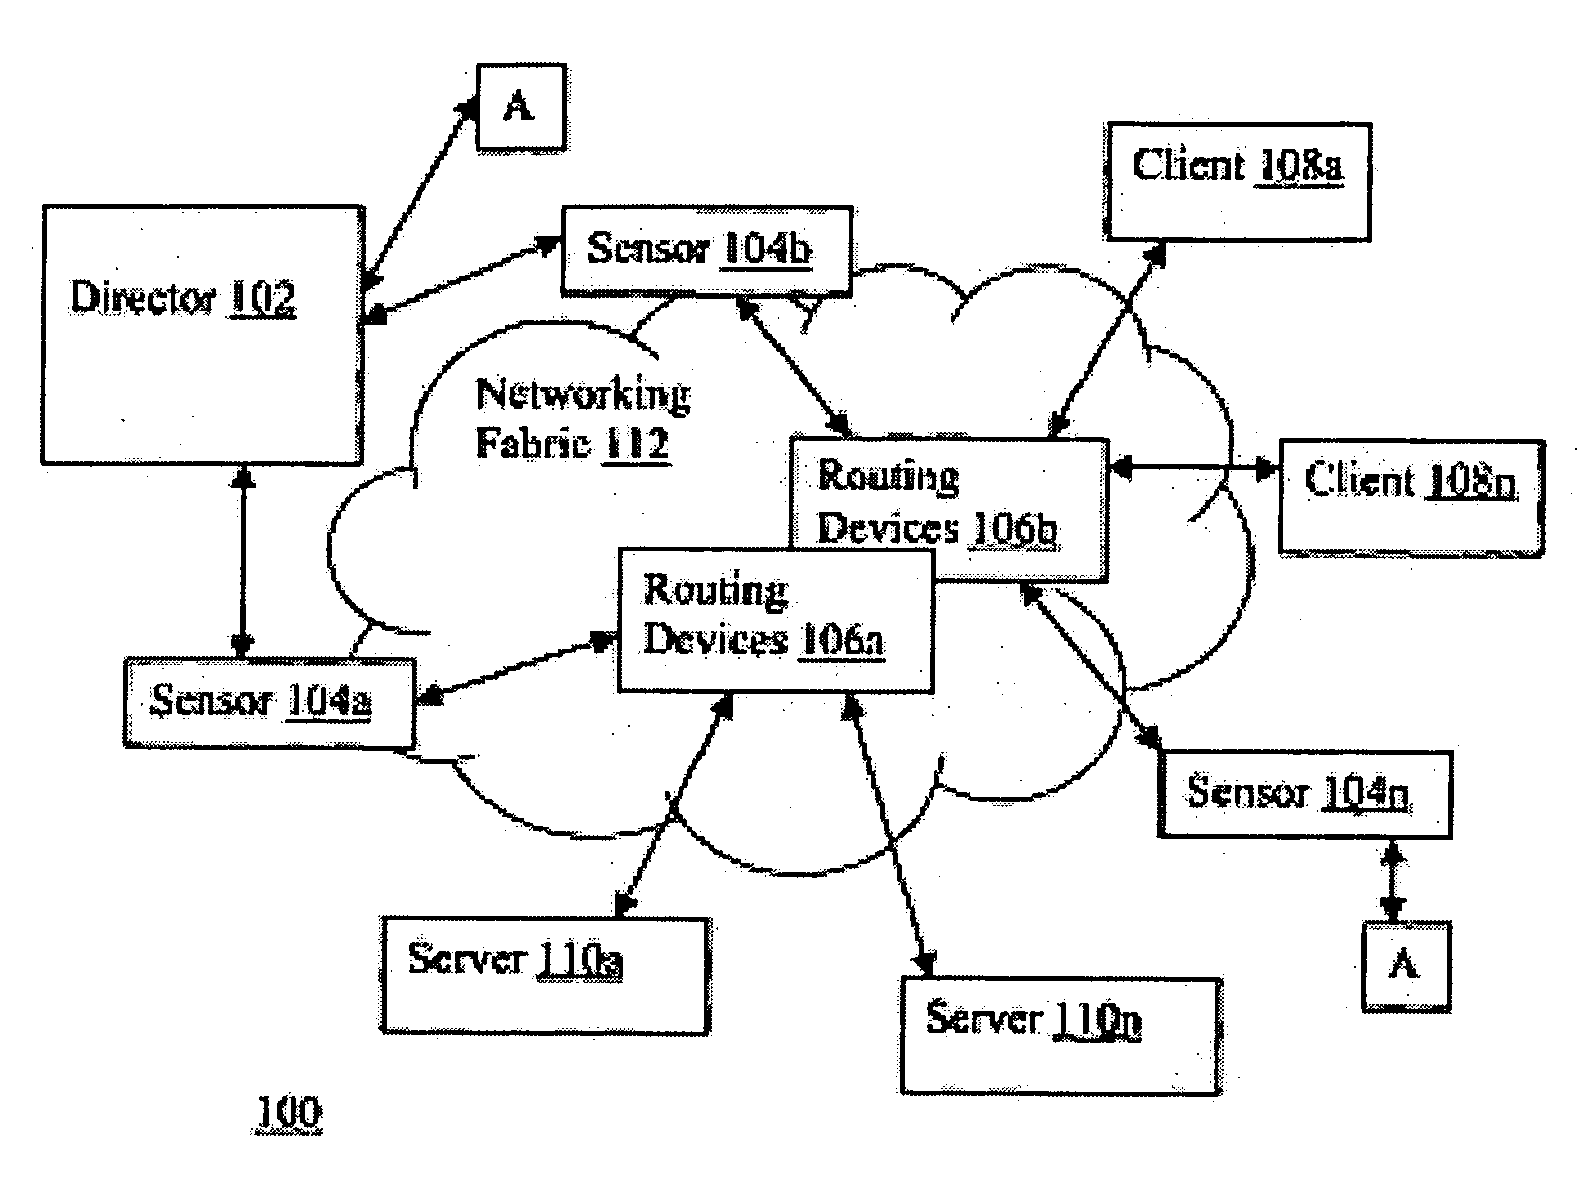 Method for configuring ACLS on network device based on flow information